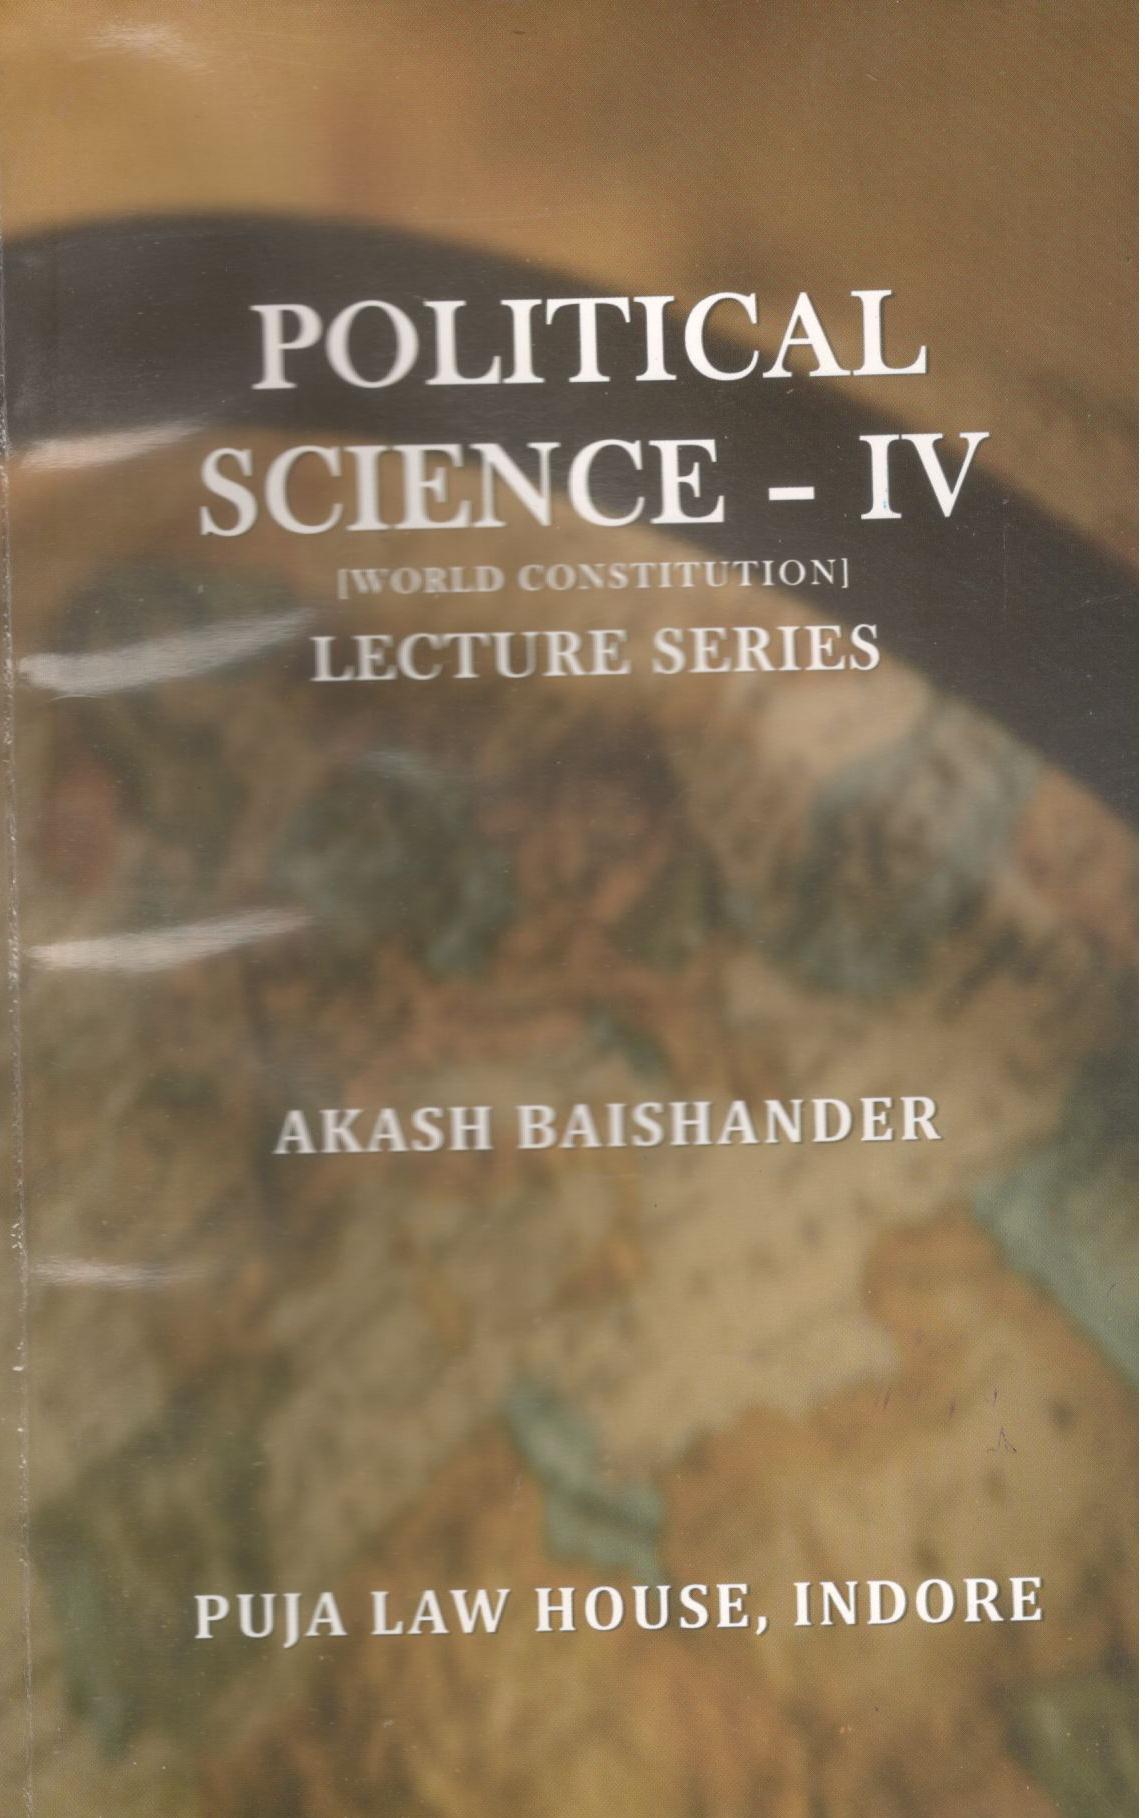  Buy Political Science - IV [World Constitution]